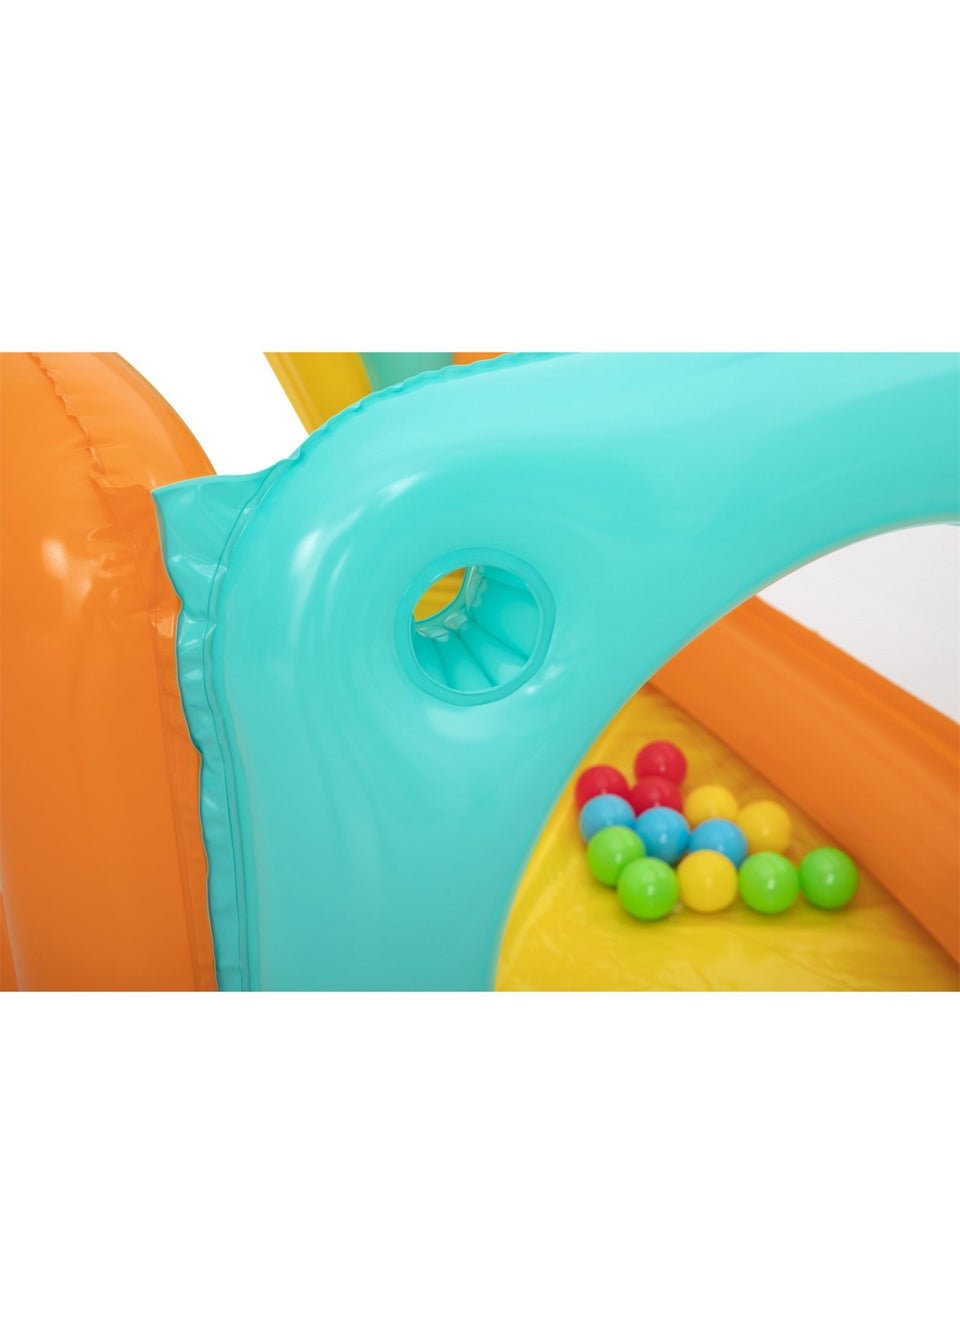 Bestway Tunneltopia Inflatable Ball Pit (70cm x 178cm x 91cm)